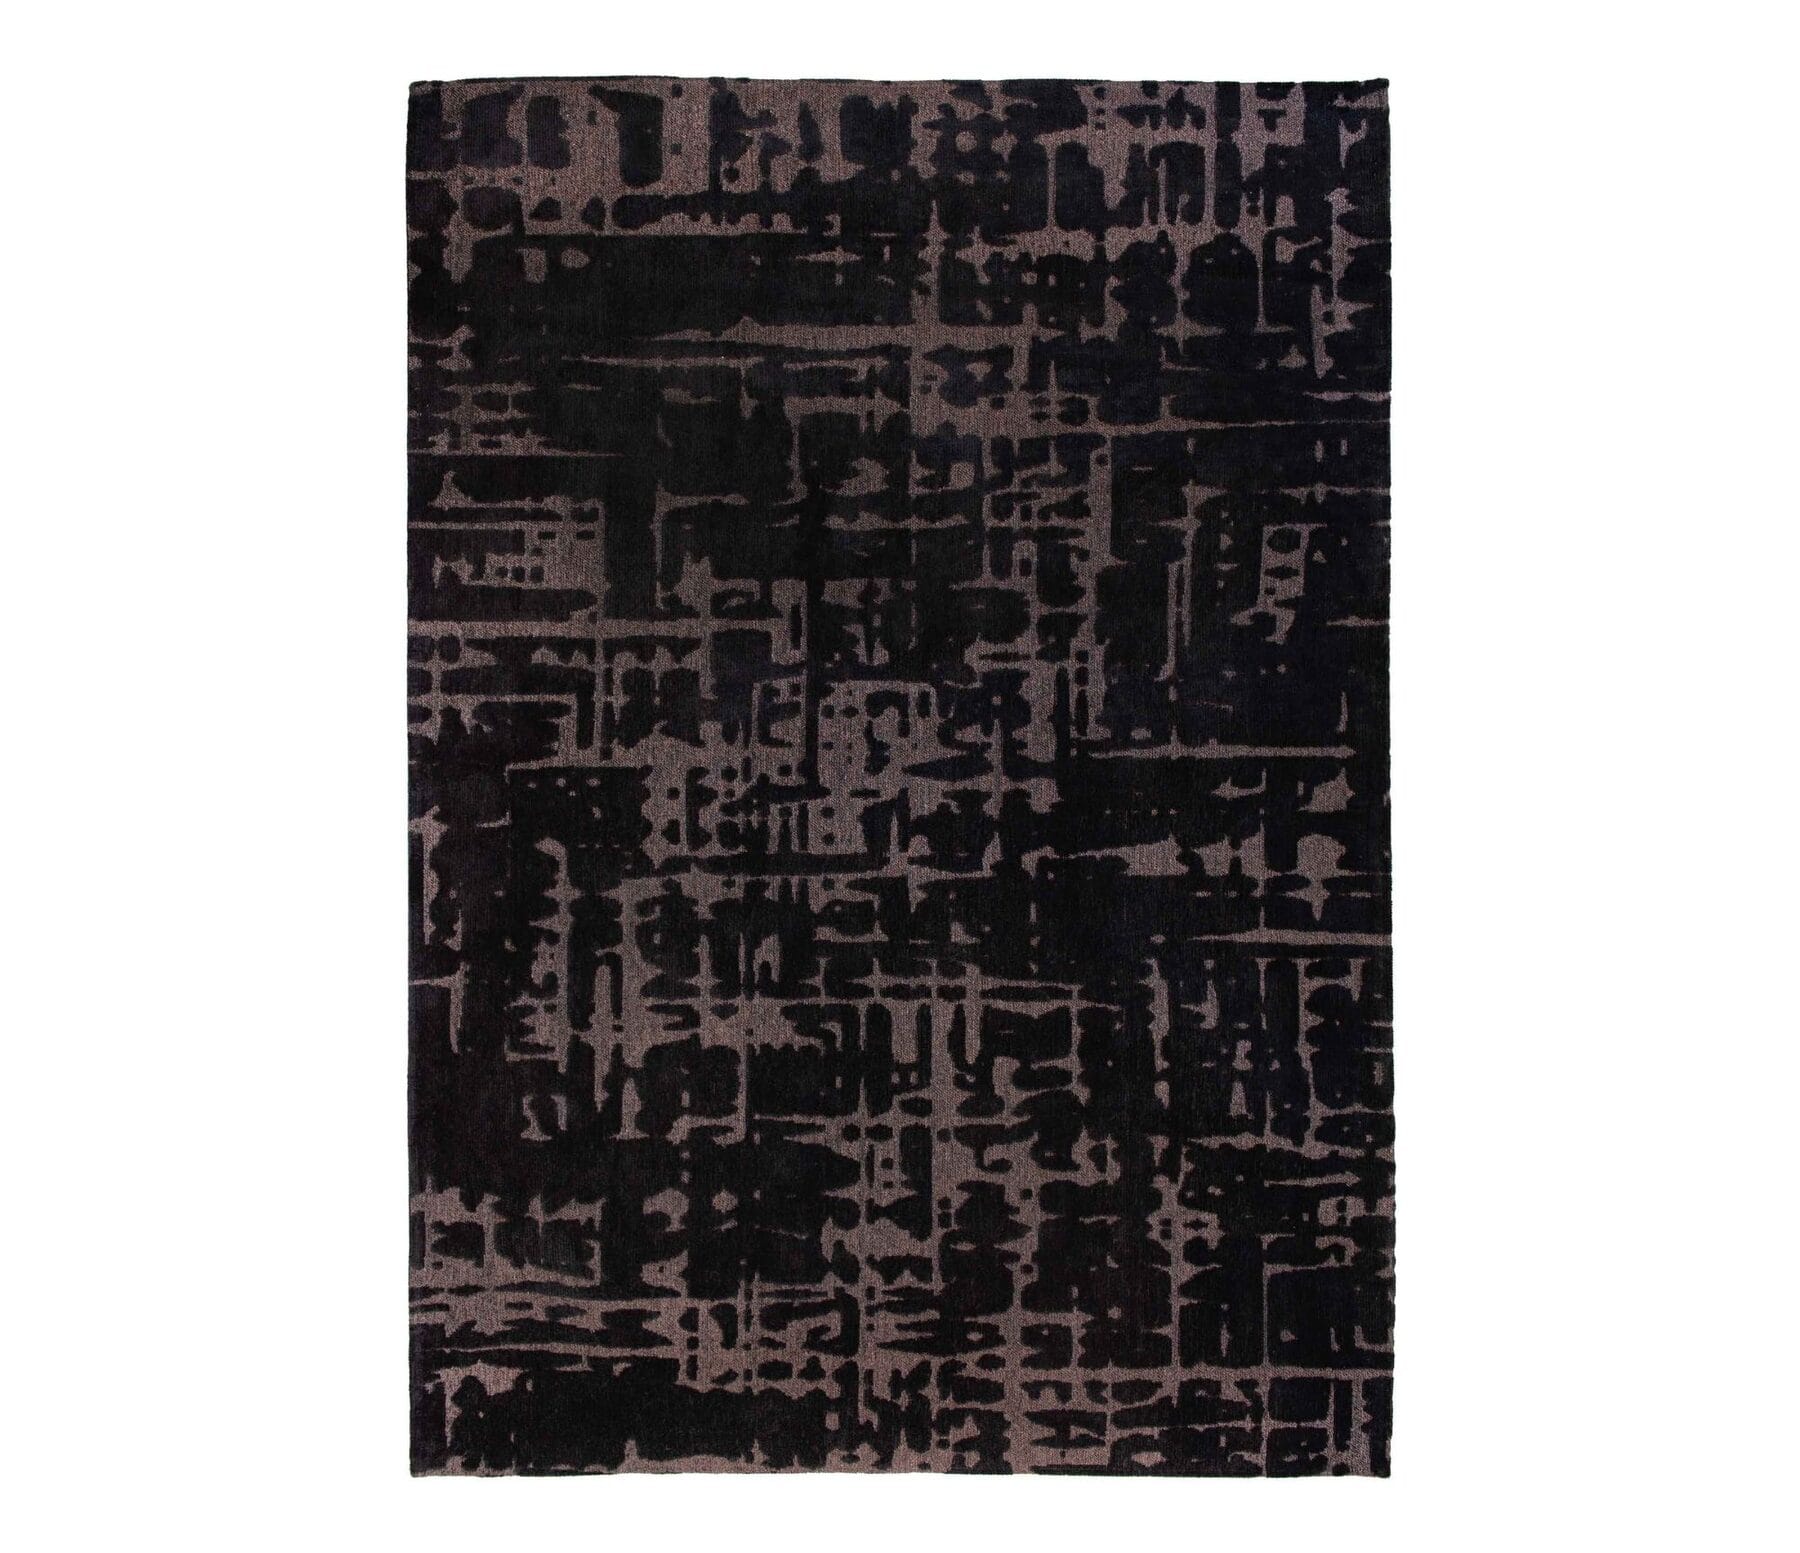 Structures Collection Baobab Black Water 9200 rug by Louis De Poortere